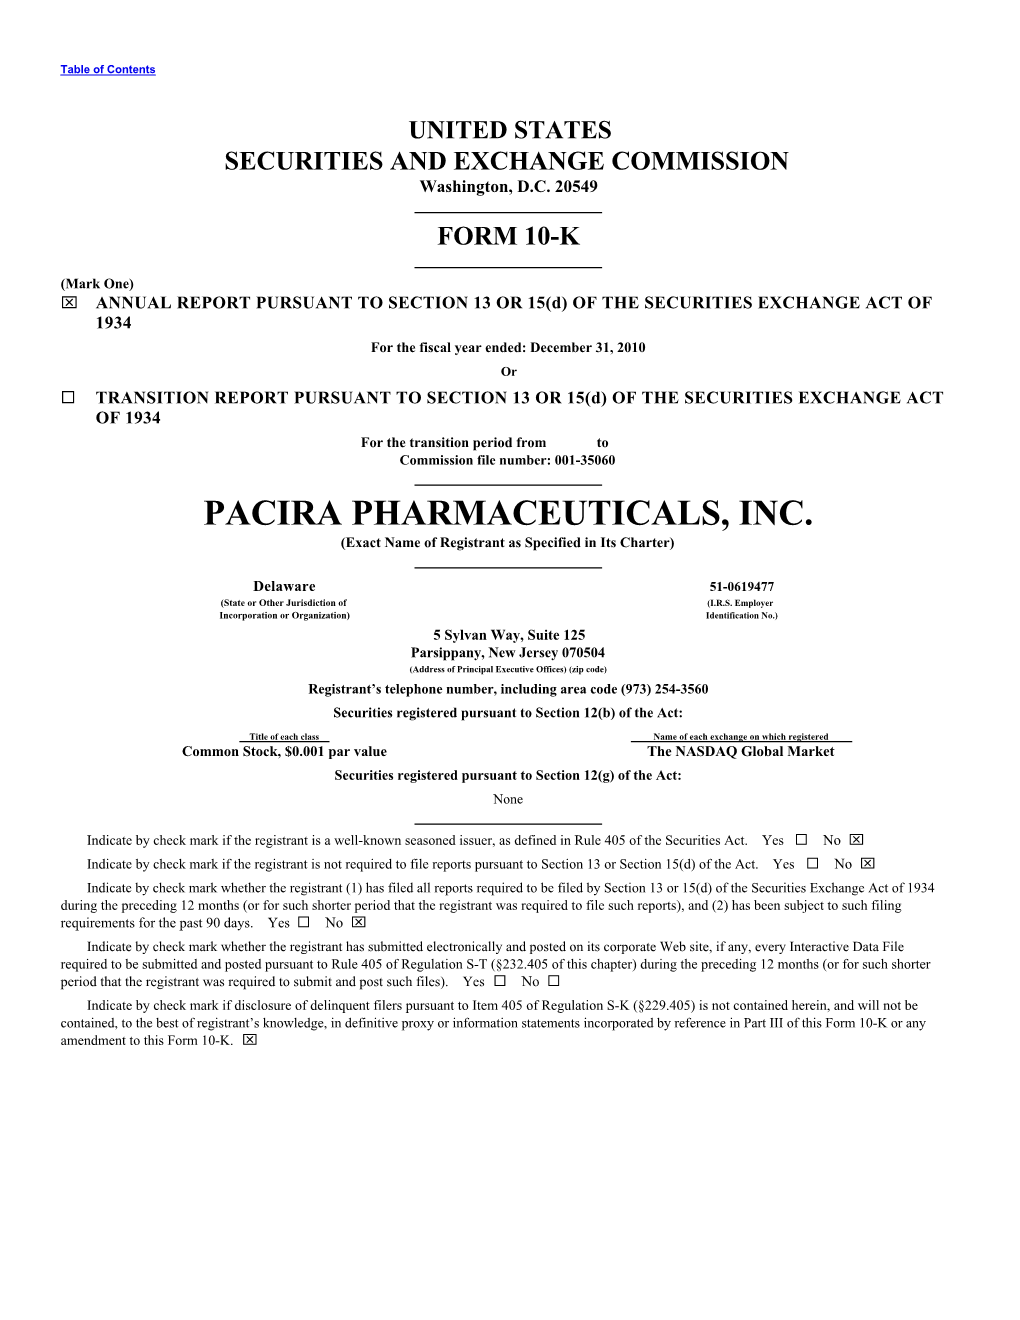 PACIRA PHARMACEUTICALS, INC. (Exact Name of Registrant As Specified in Its Charter)